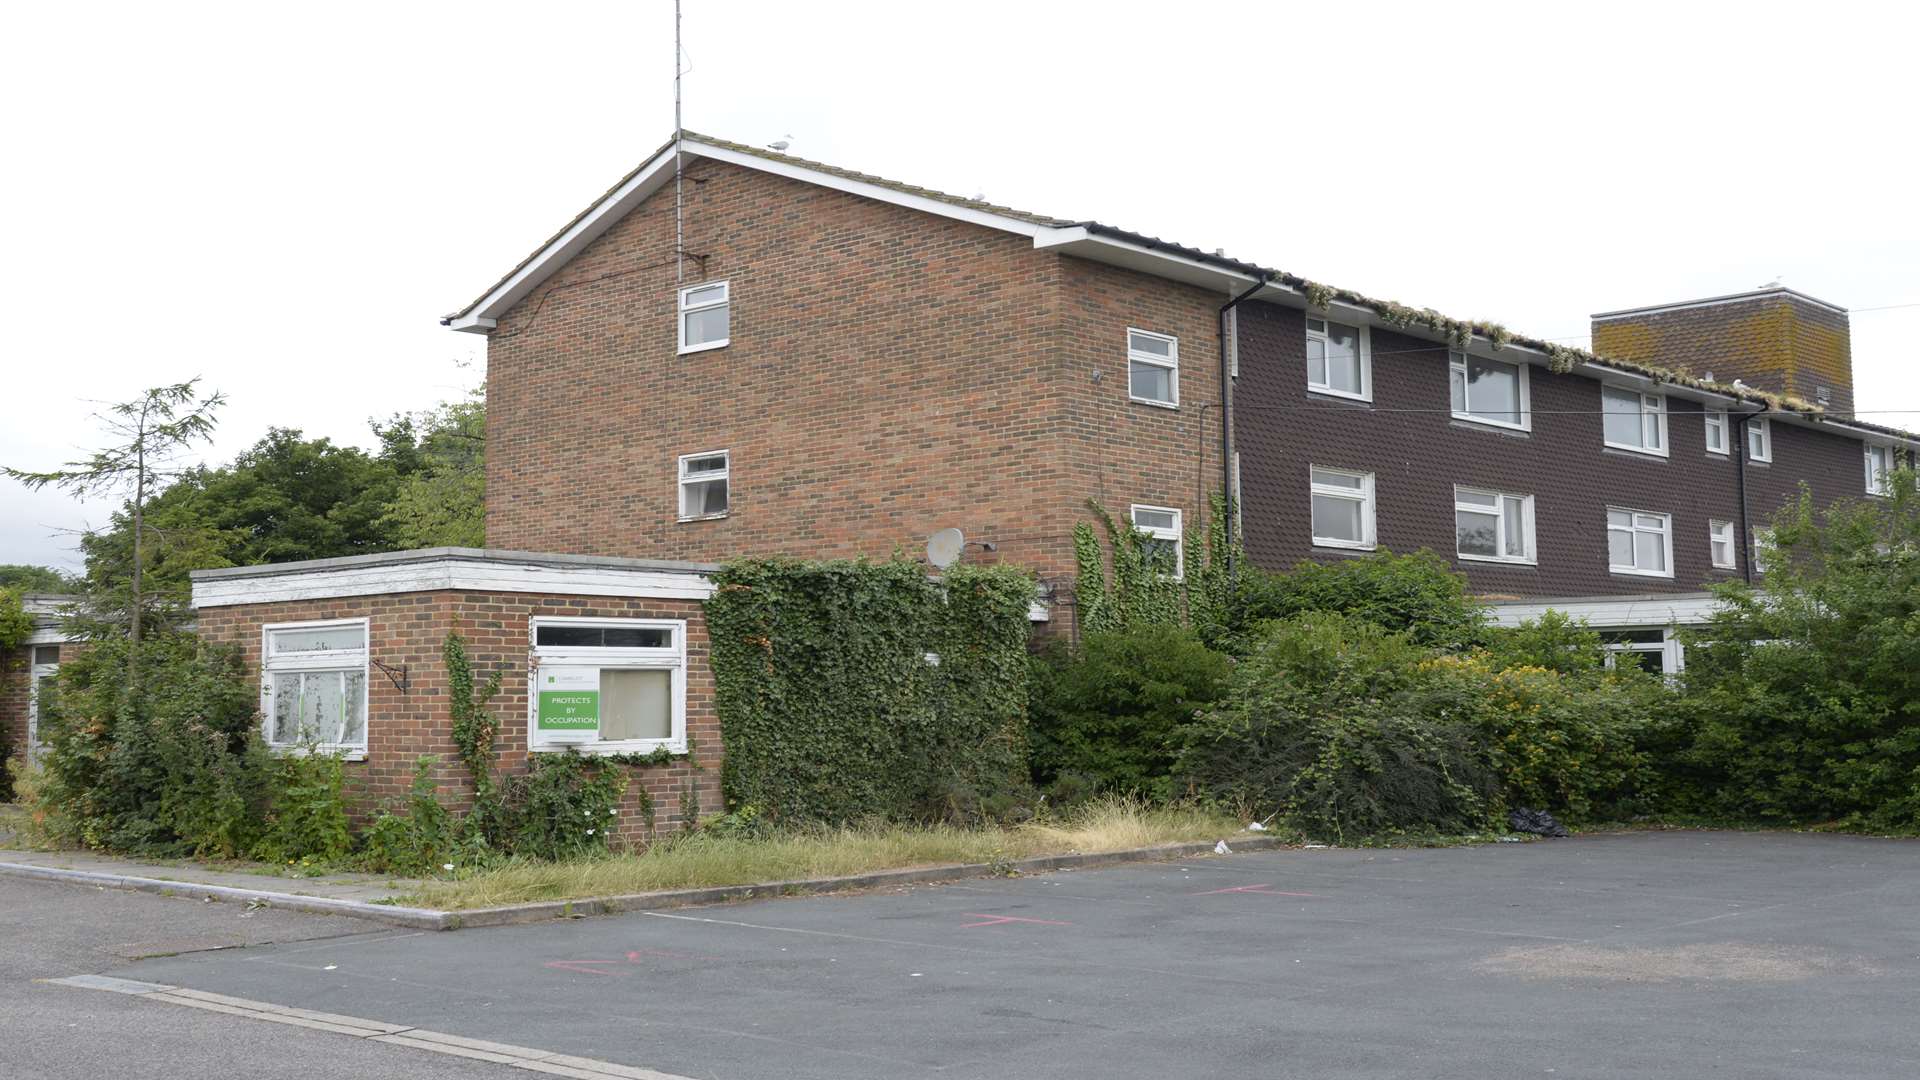 The former Ladesfield Care Home has now closed after housing child asylum seekers for about six months. Picture: Chris Davey